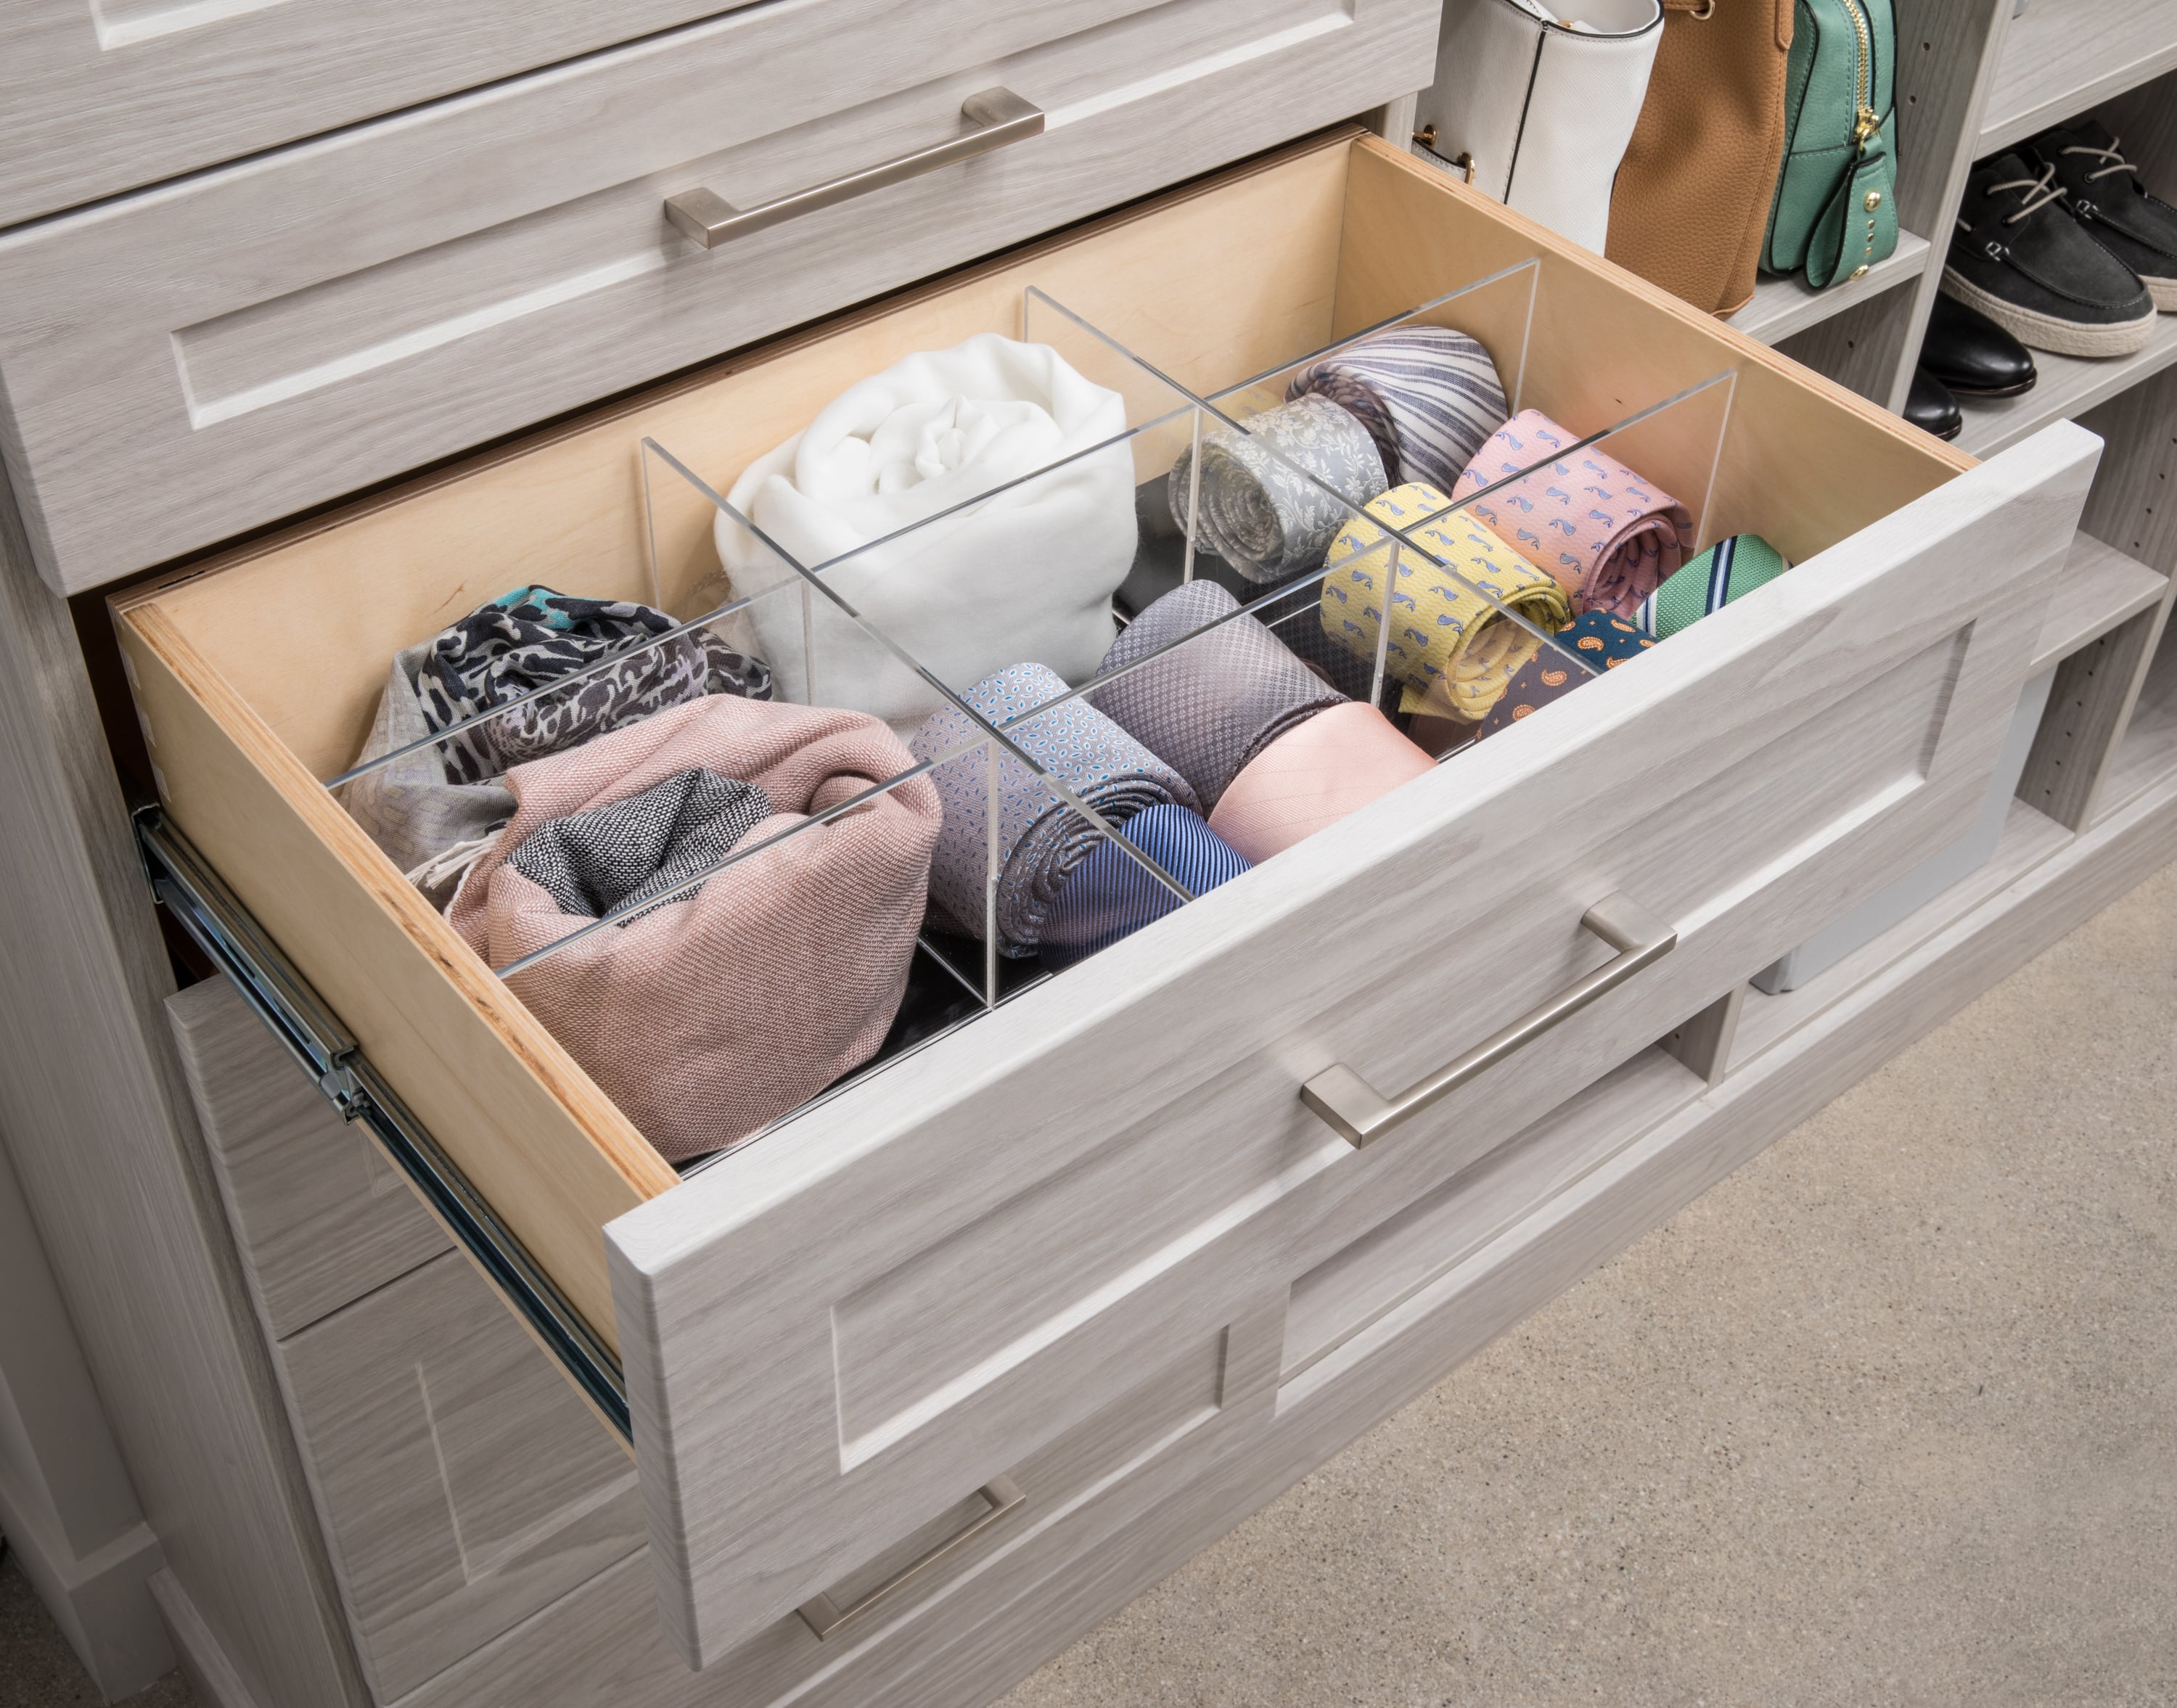 Open drawer with clothing articles inside